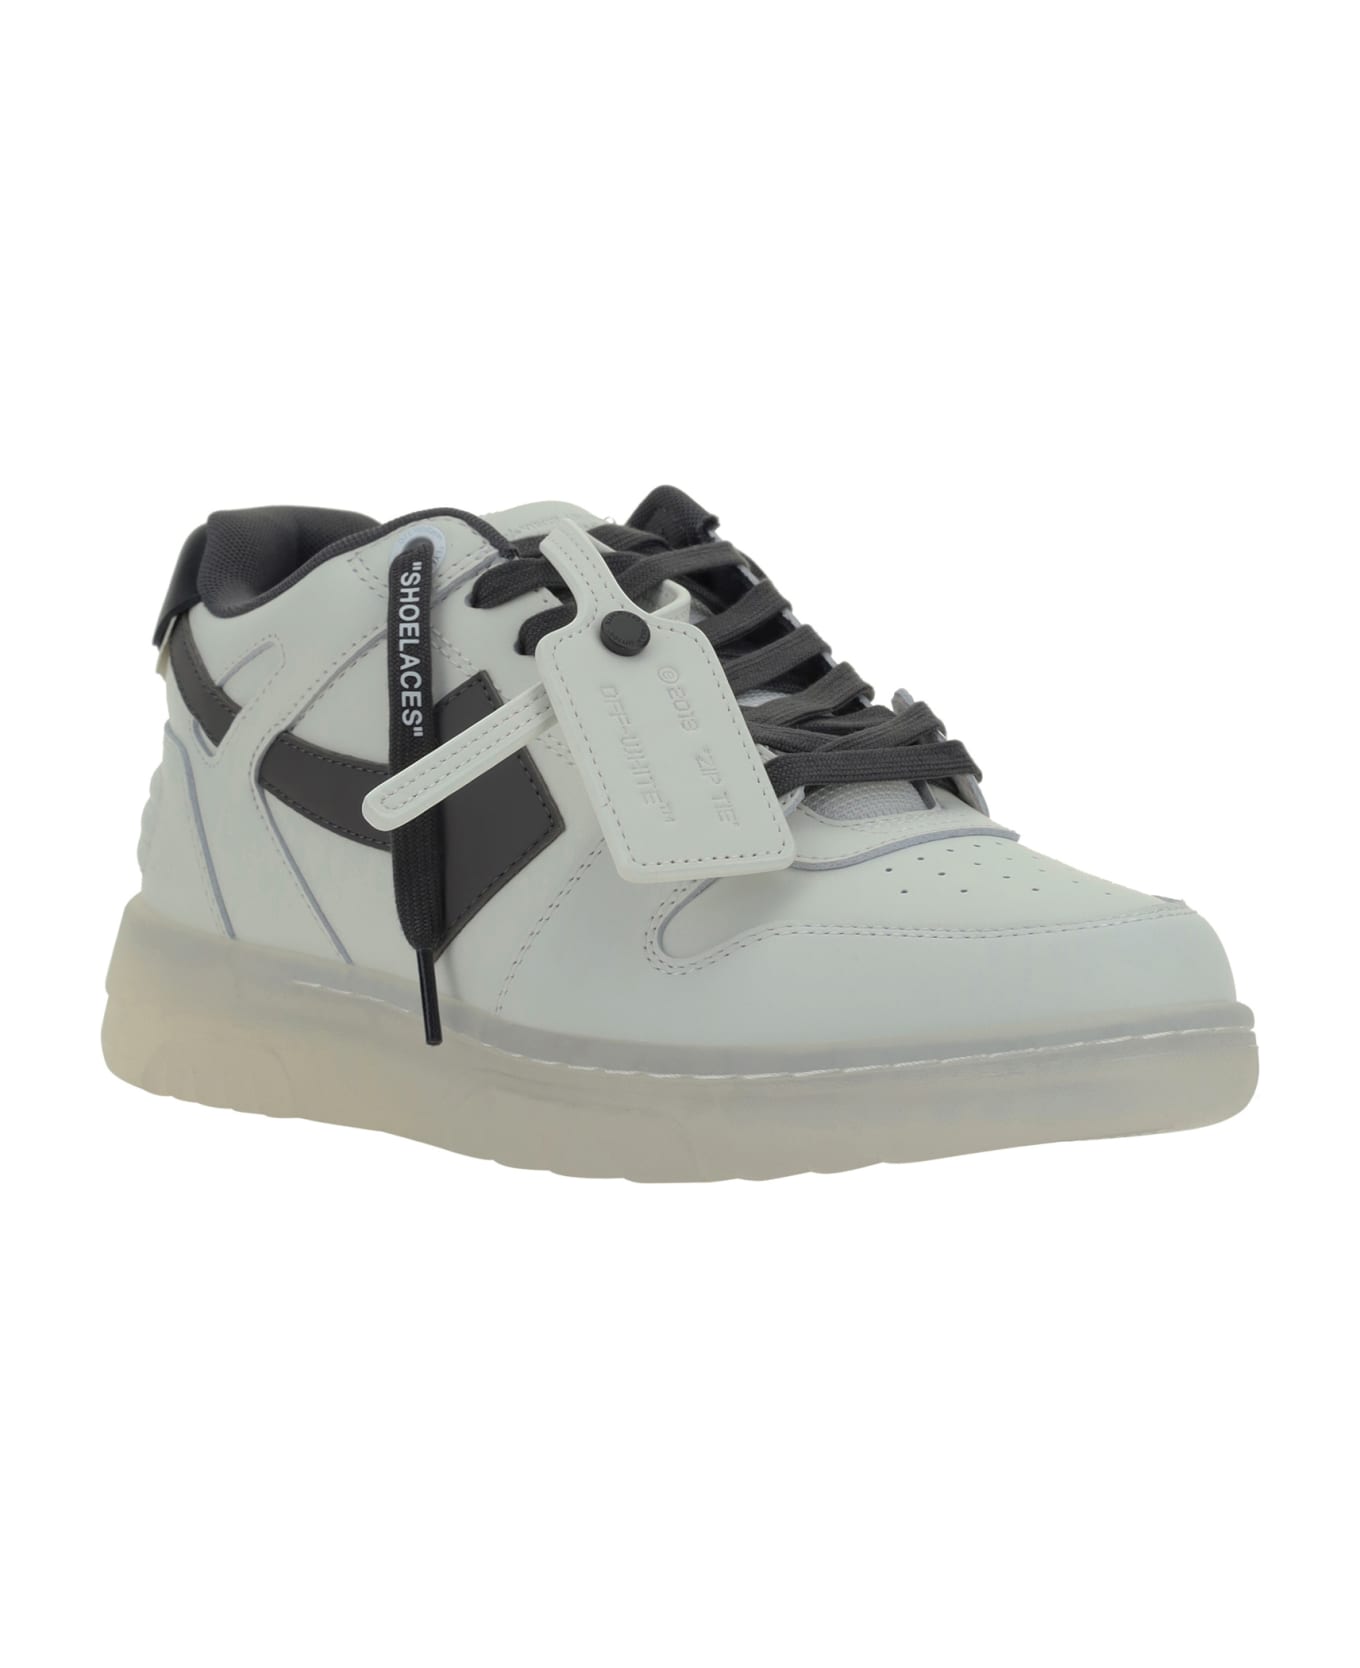 Off-White Out Of Office Sneakers - White スニーカー